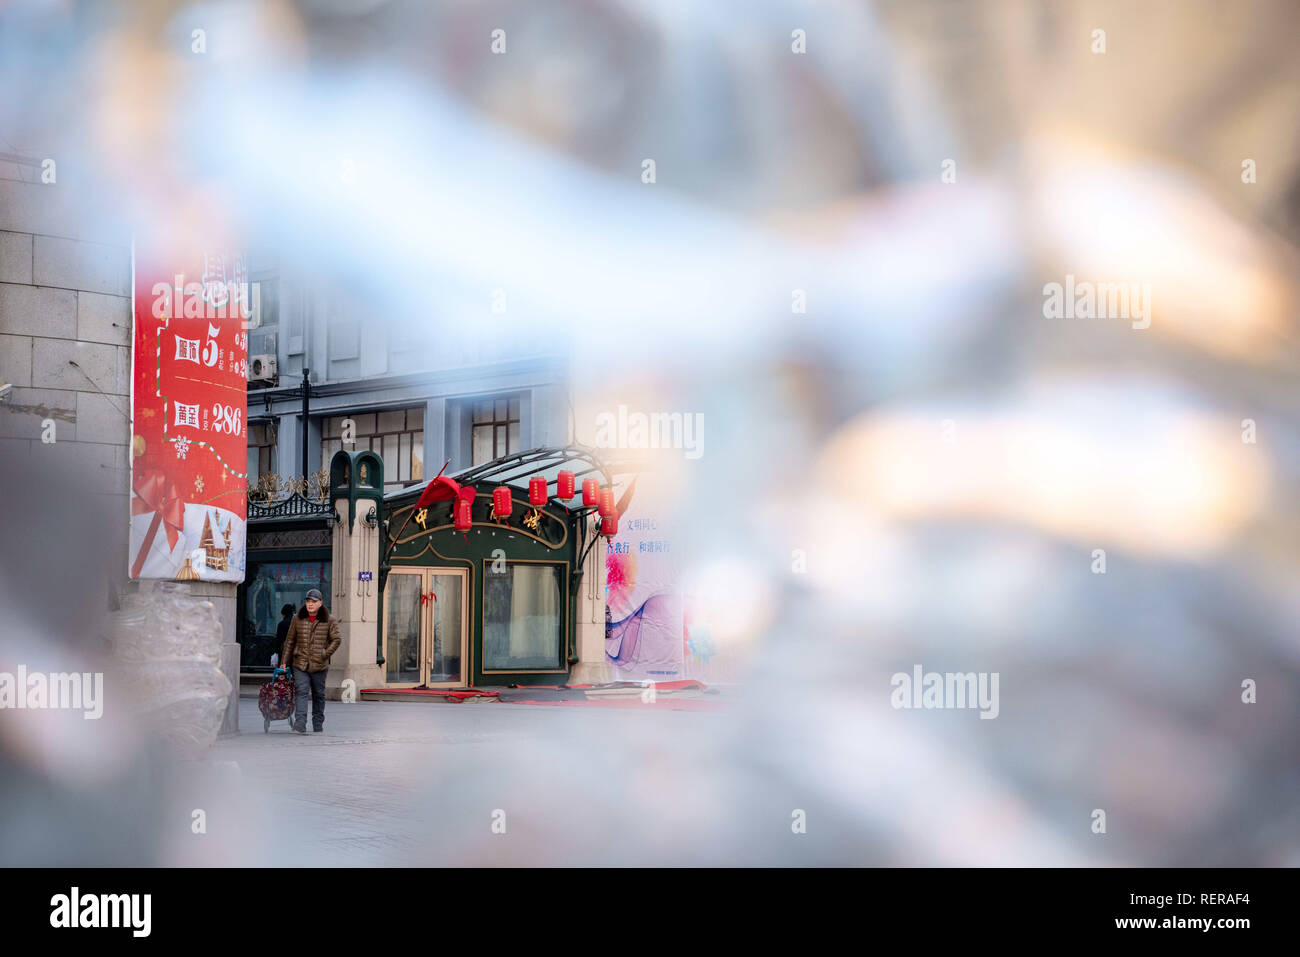 Harbin, Harbin, China. 22nd Jan, 2019. Harbin, CHINA-A glimpse of architectures in Harbin from a hole of ice sculpture in Harbin, northeast ChinaÃ¢â‚¬â„¢s Heilongjiang Province. Credit: SIPA Asia/ZUMA Wire/Alamy Live News Stock Photo